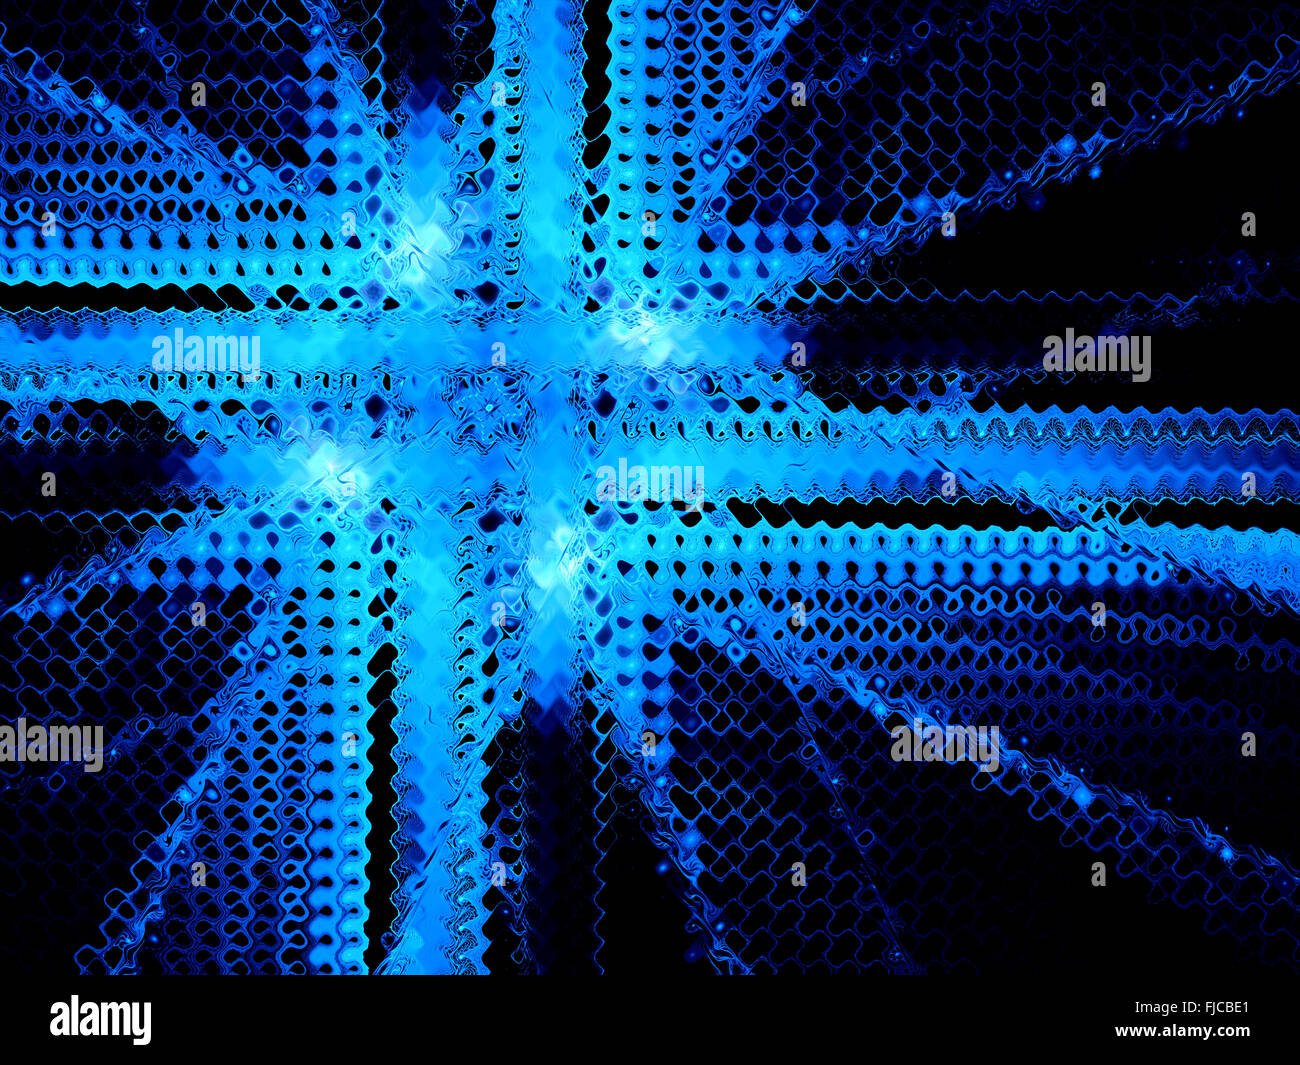 Blue fractal mesh artwork, computer generated abstract background Stock Photo